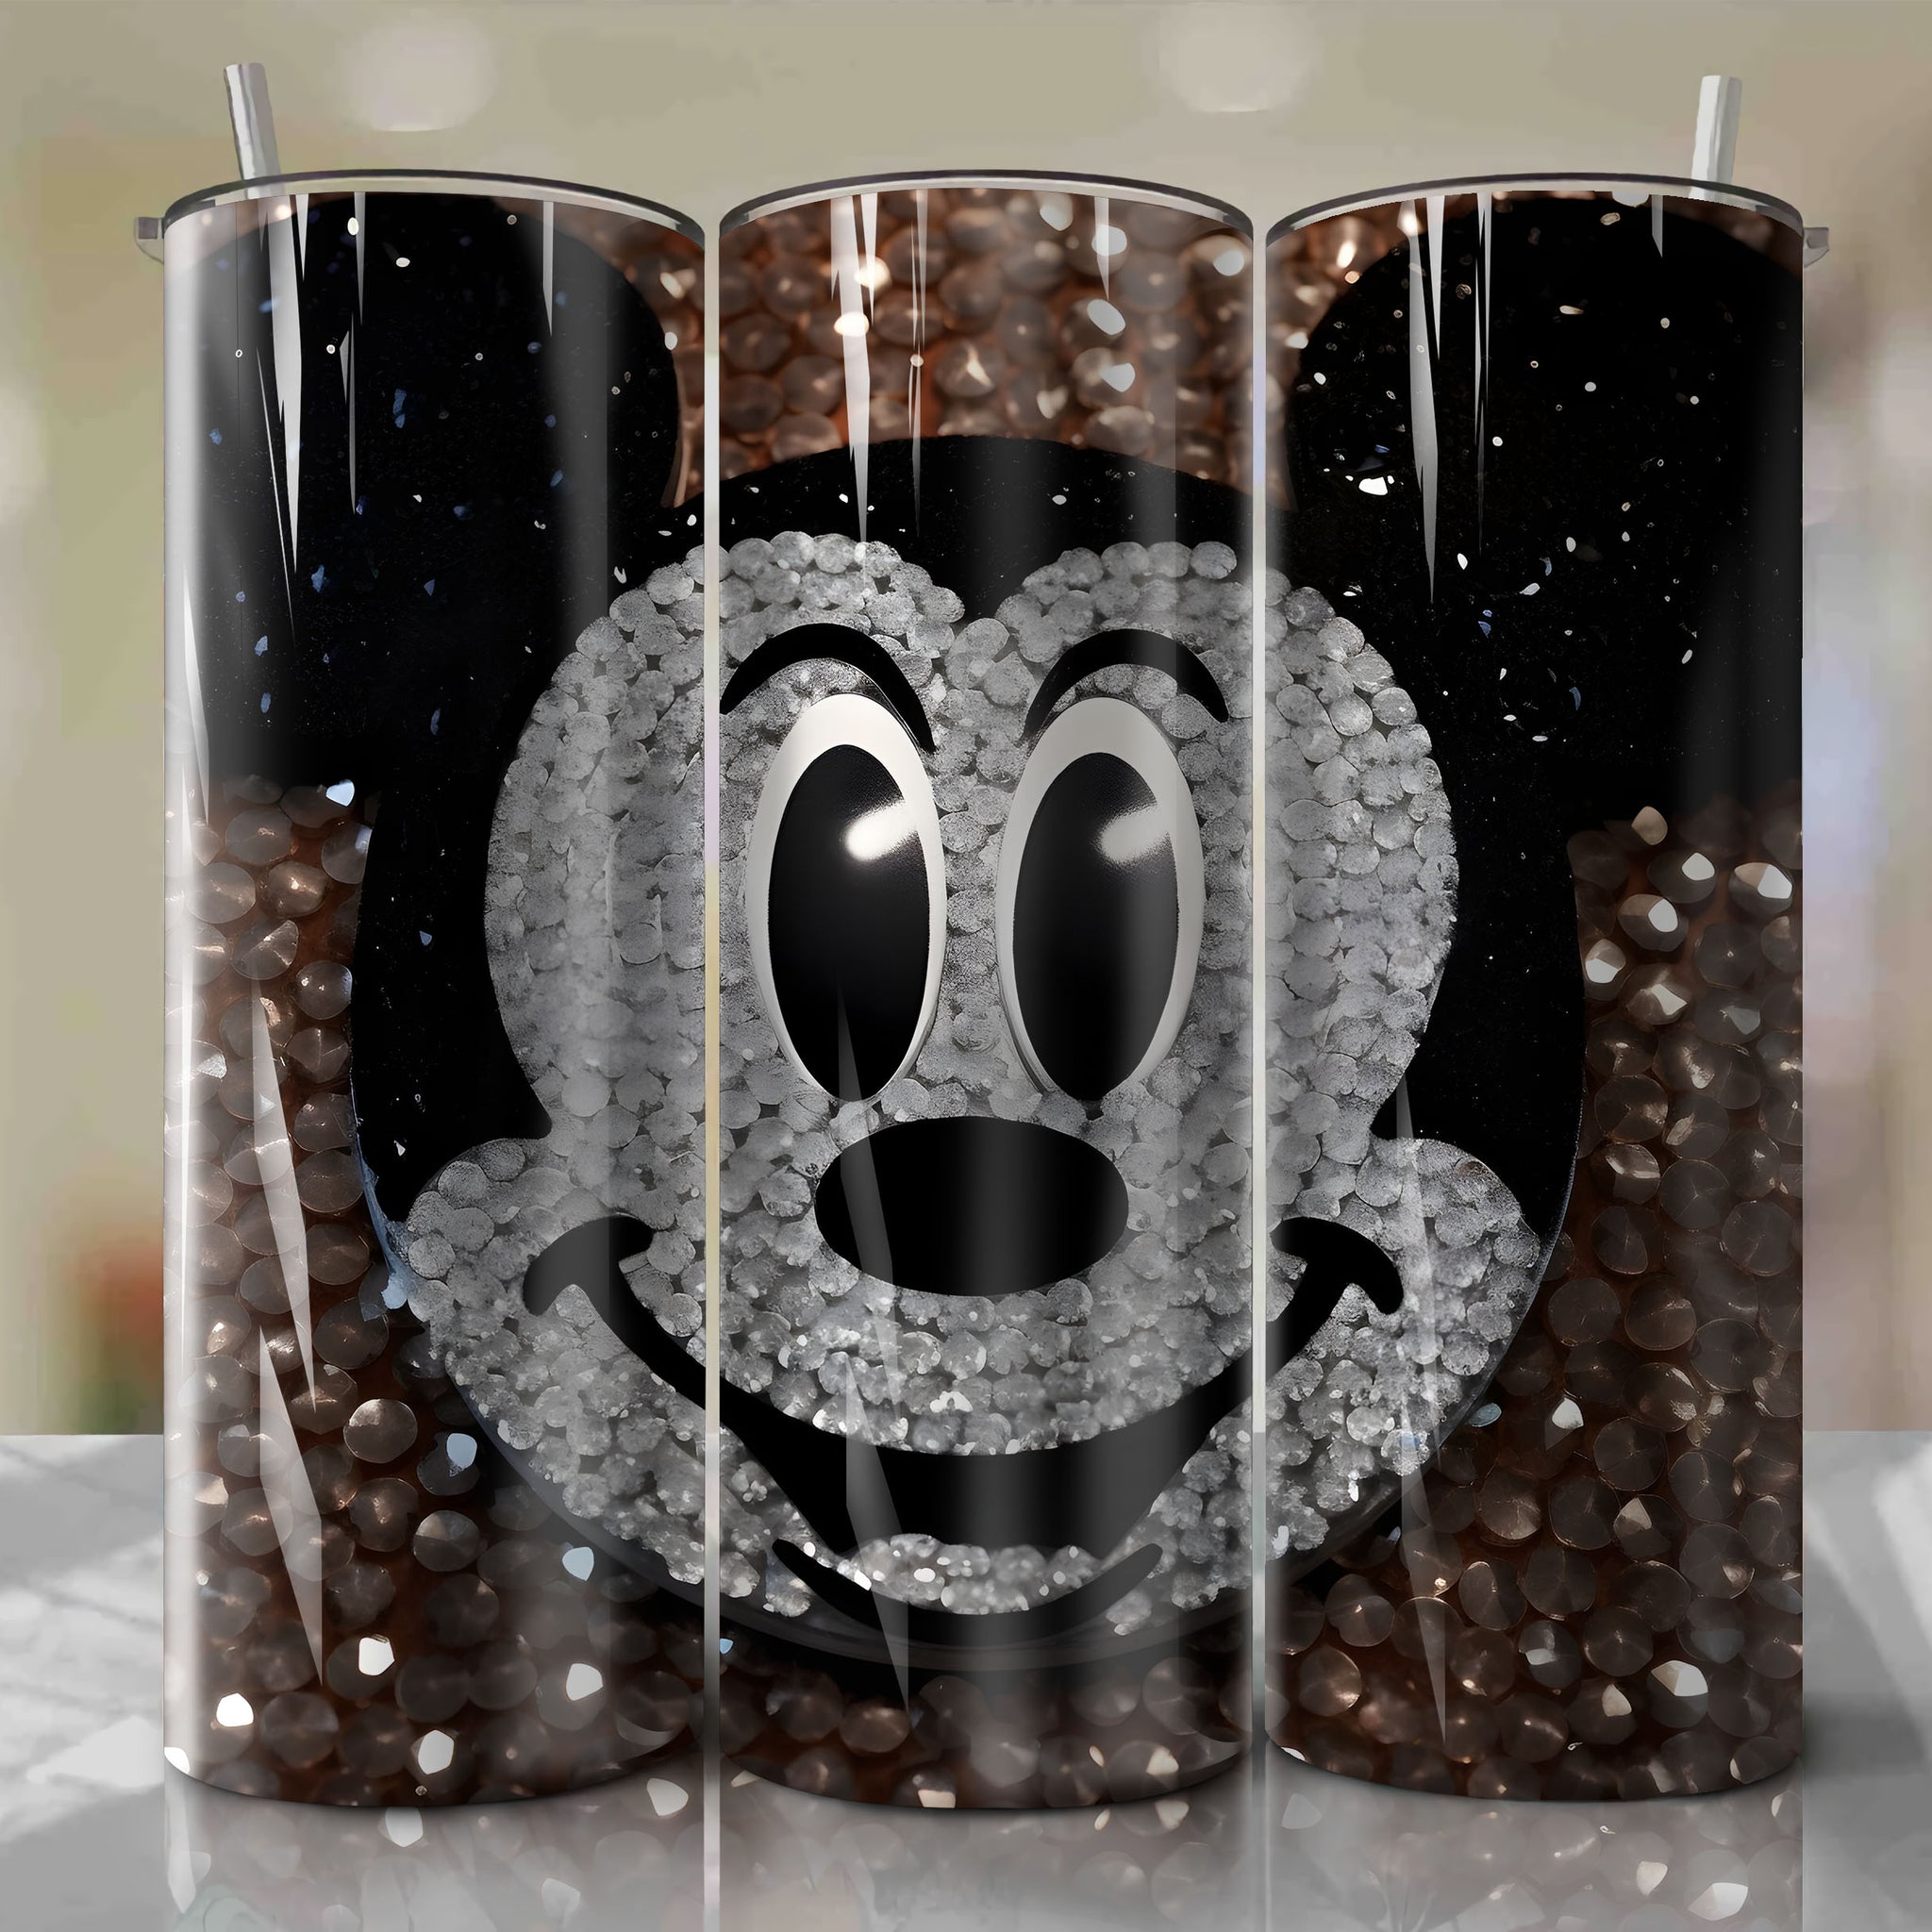 Exquisite Mickey Mouse Face 3D Bling Design - Digital Download for Sublimation Crafts